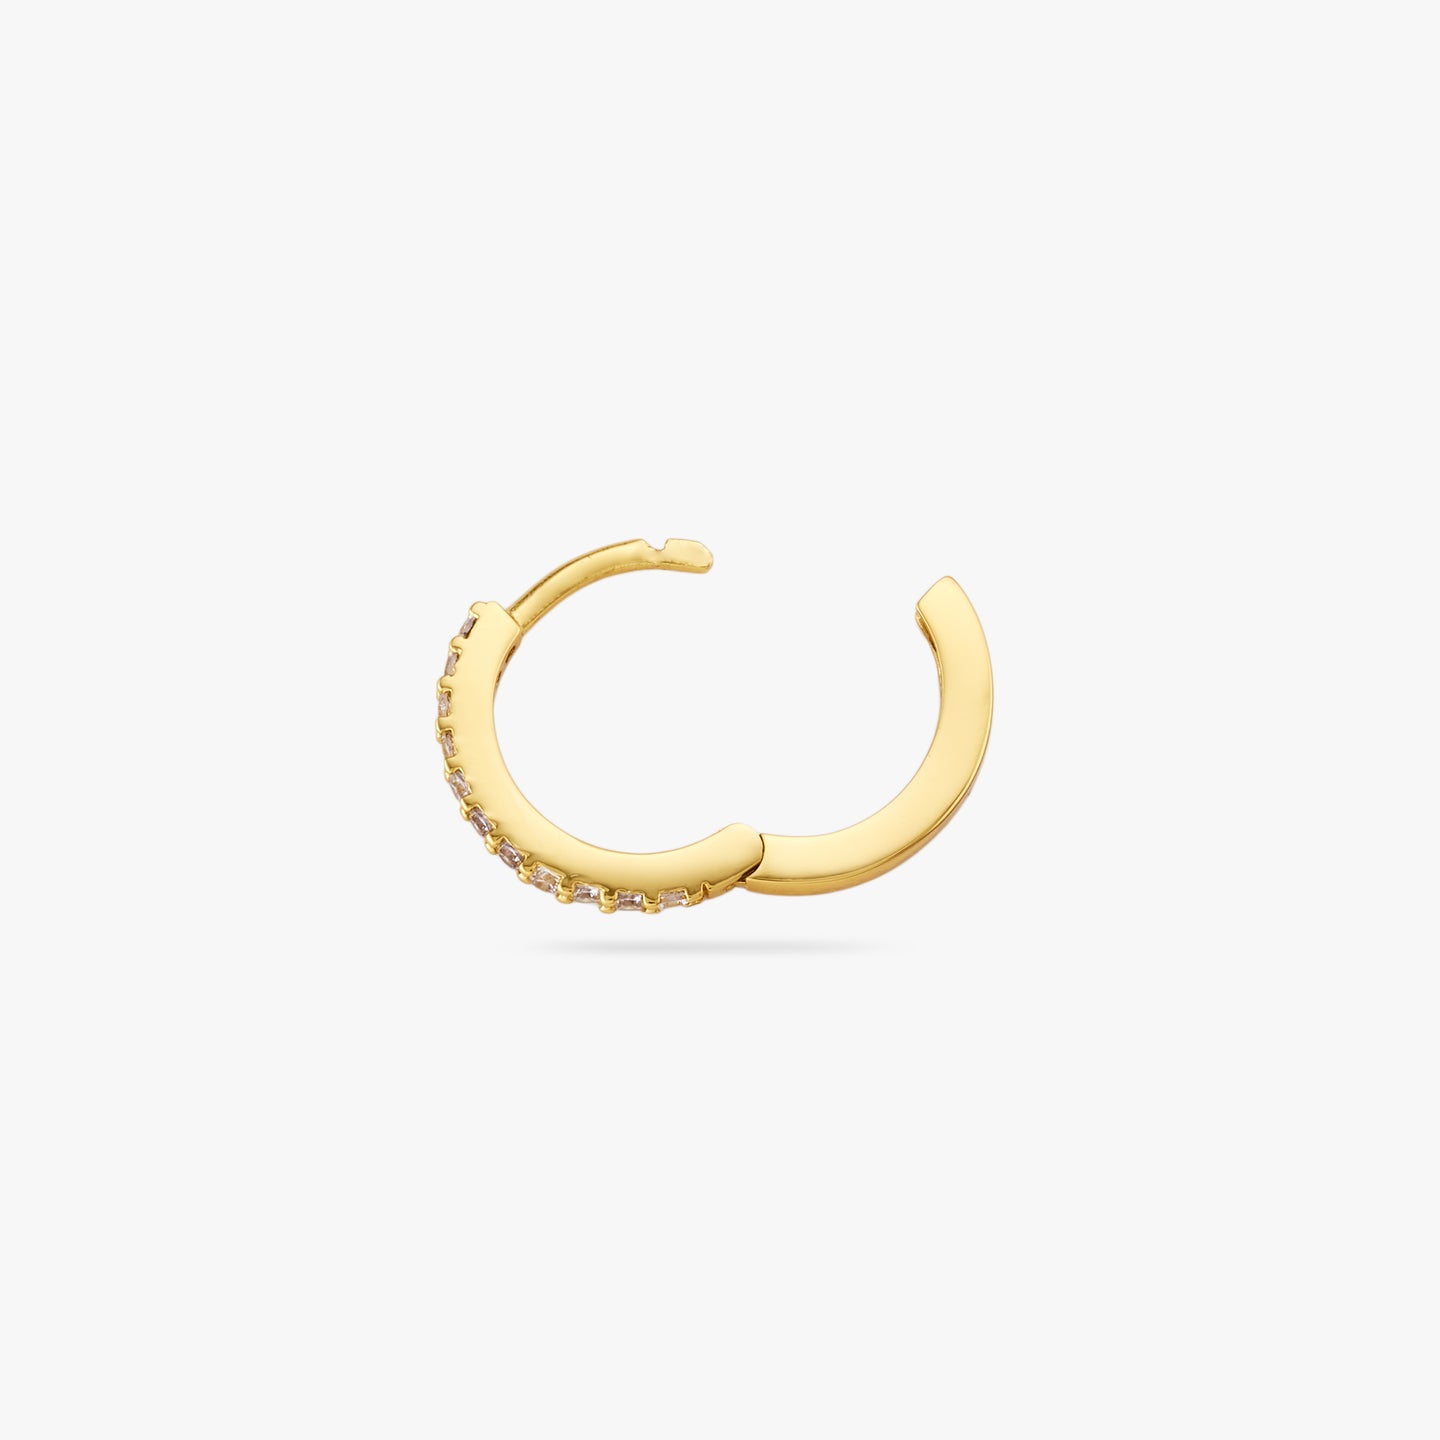 This is a small gold huggie measuring 13mm that features clear cz gems along the front color:null|gold/clear